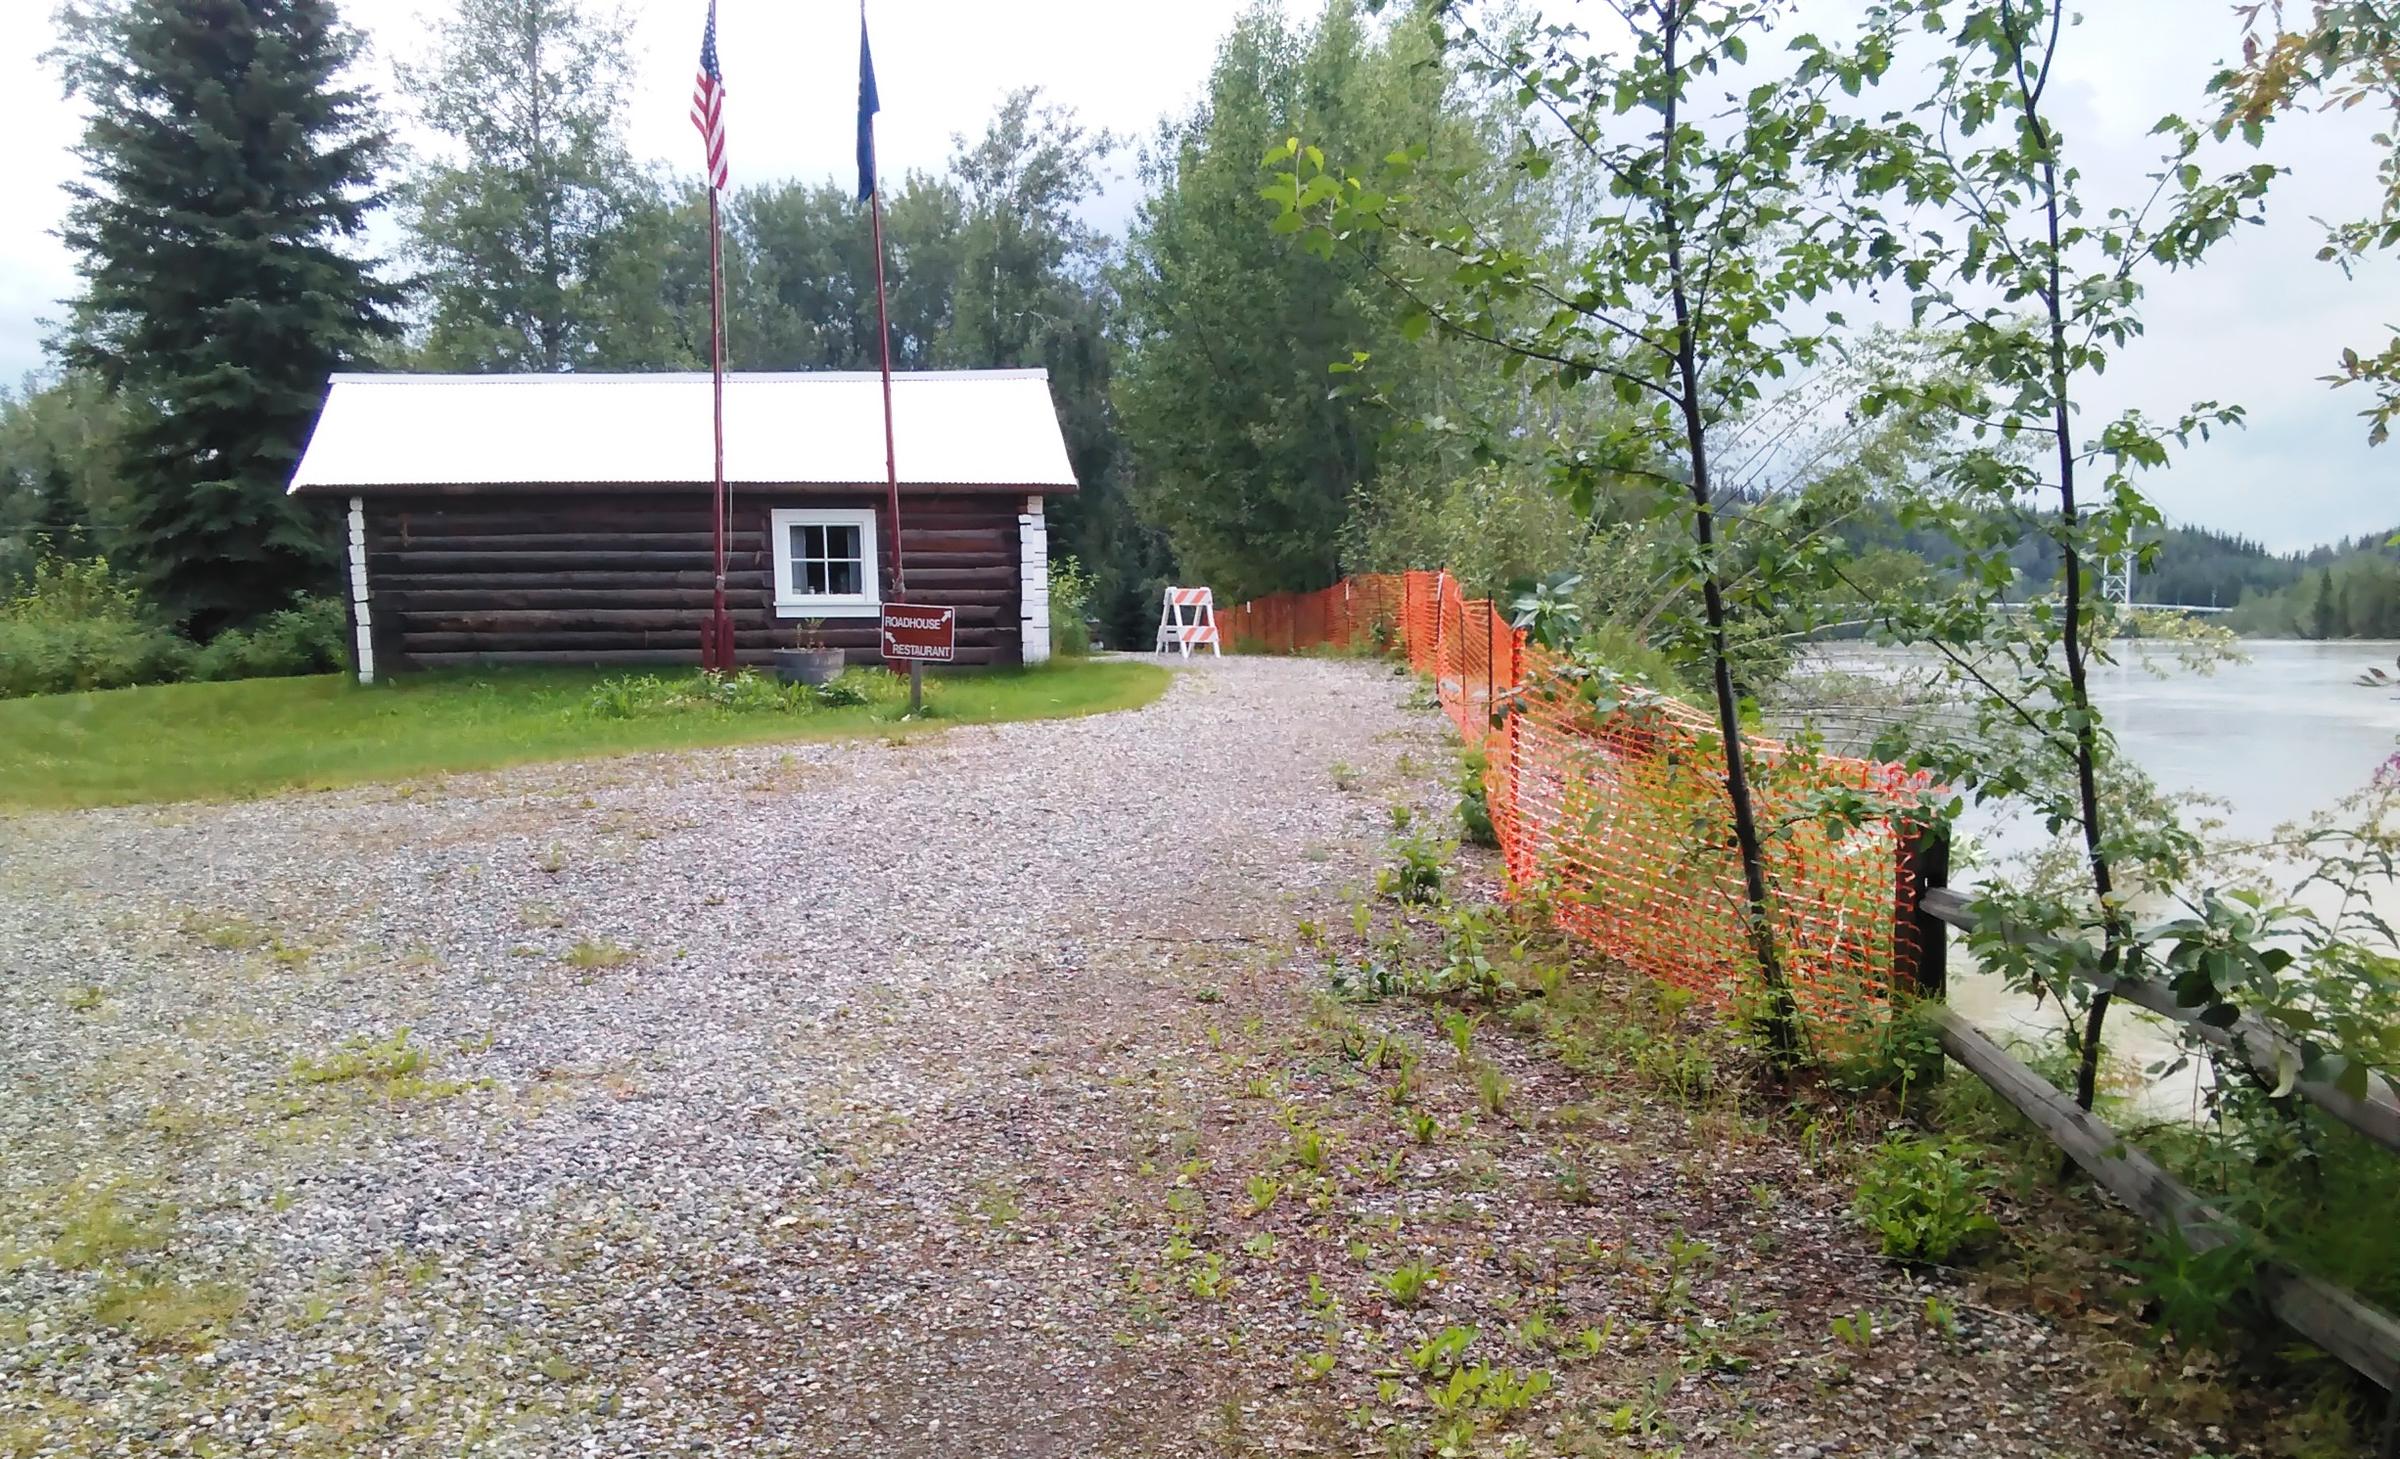 Alaska State Parks is trying to raise money for a riverbank-stabilization project that would halt the Tanana River from washing away the bank that's already been eroded to within 13 feet of this historic cabin at Big Delta State Historical Park. (Photo courtesy of Monica Gray - Alaska State Parks)